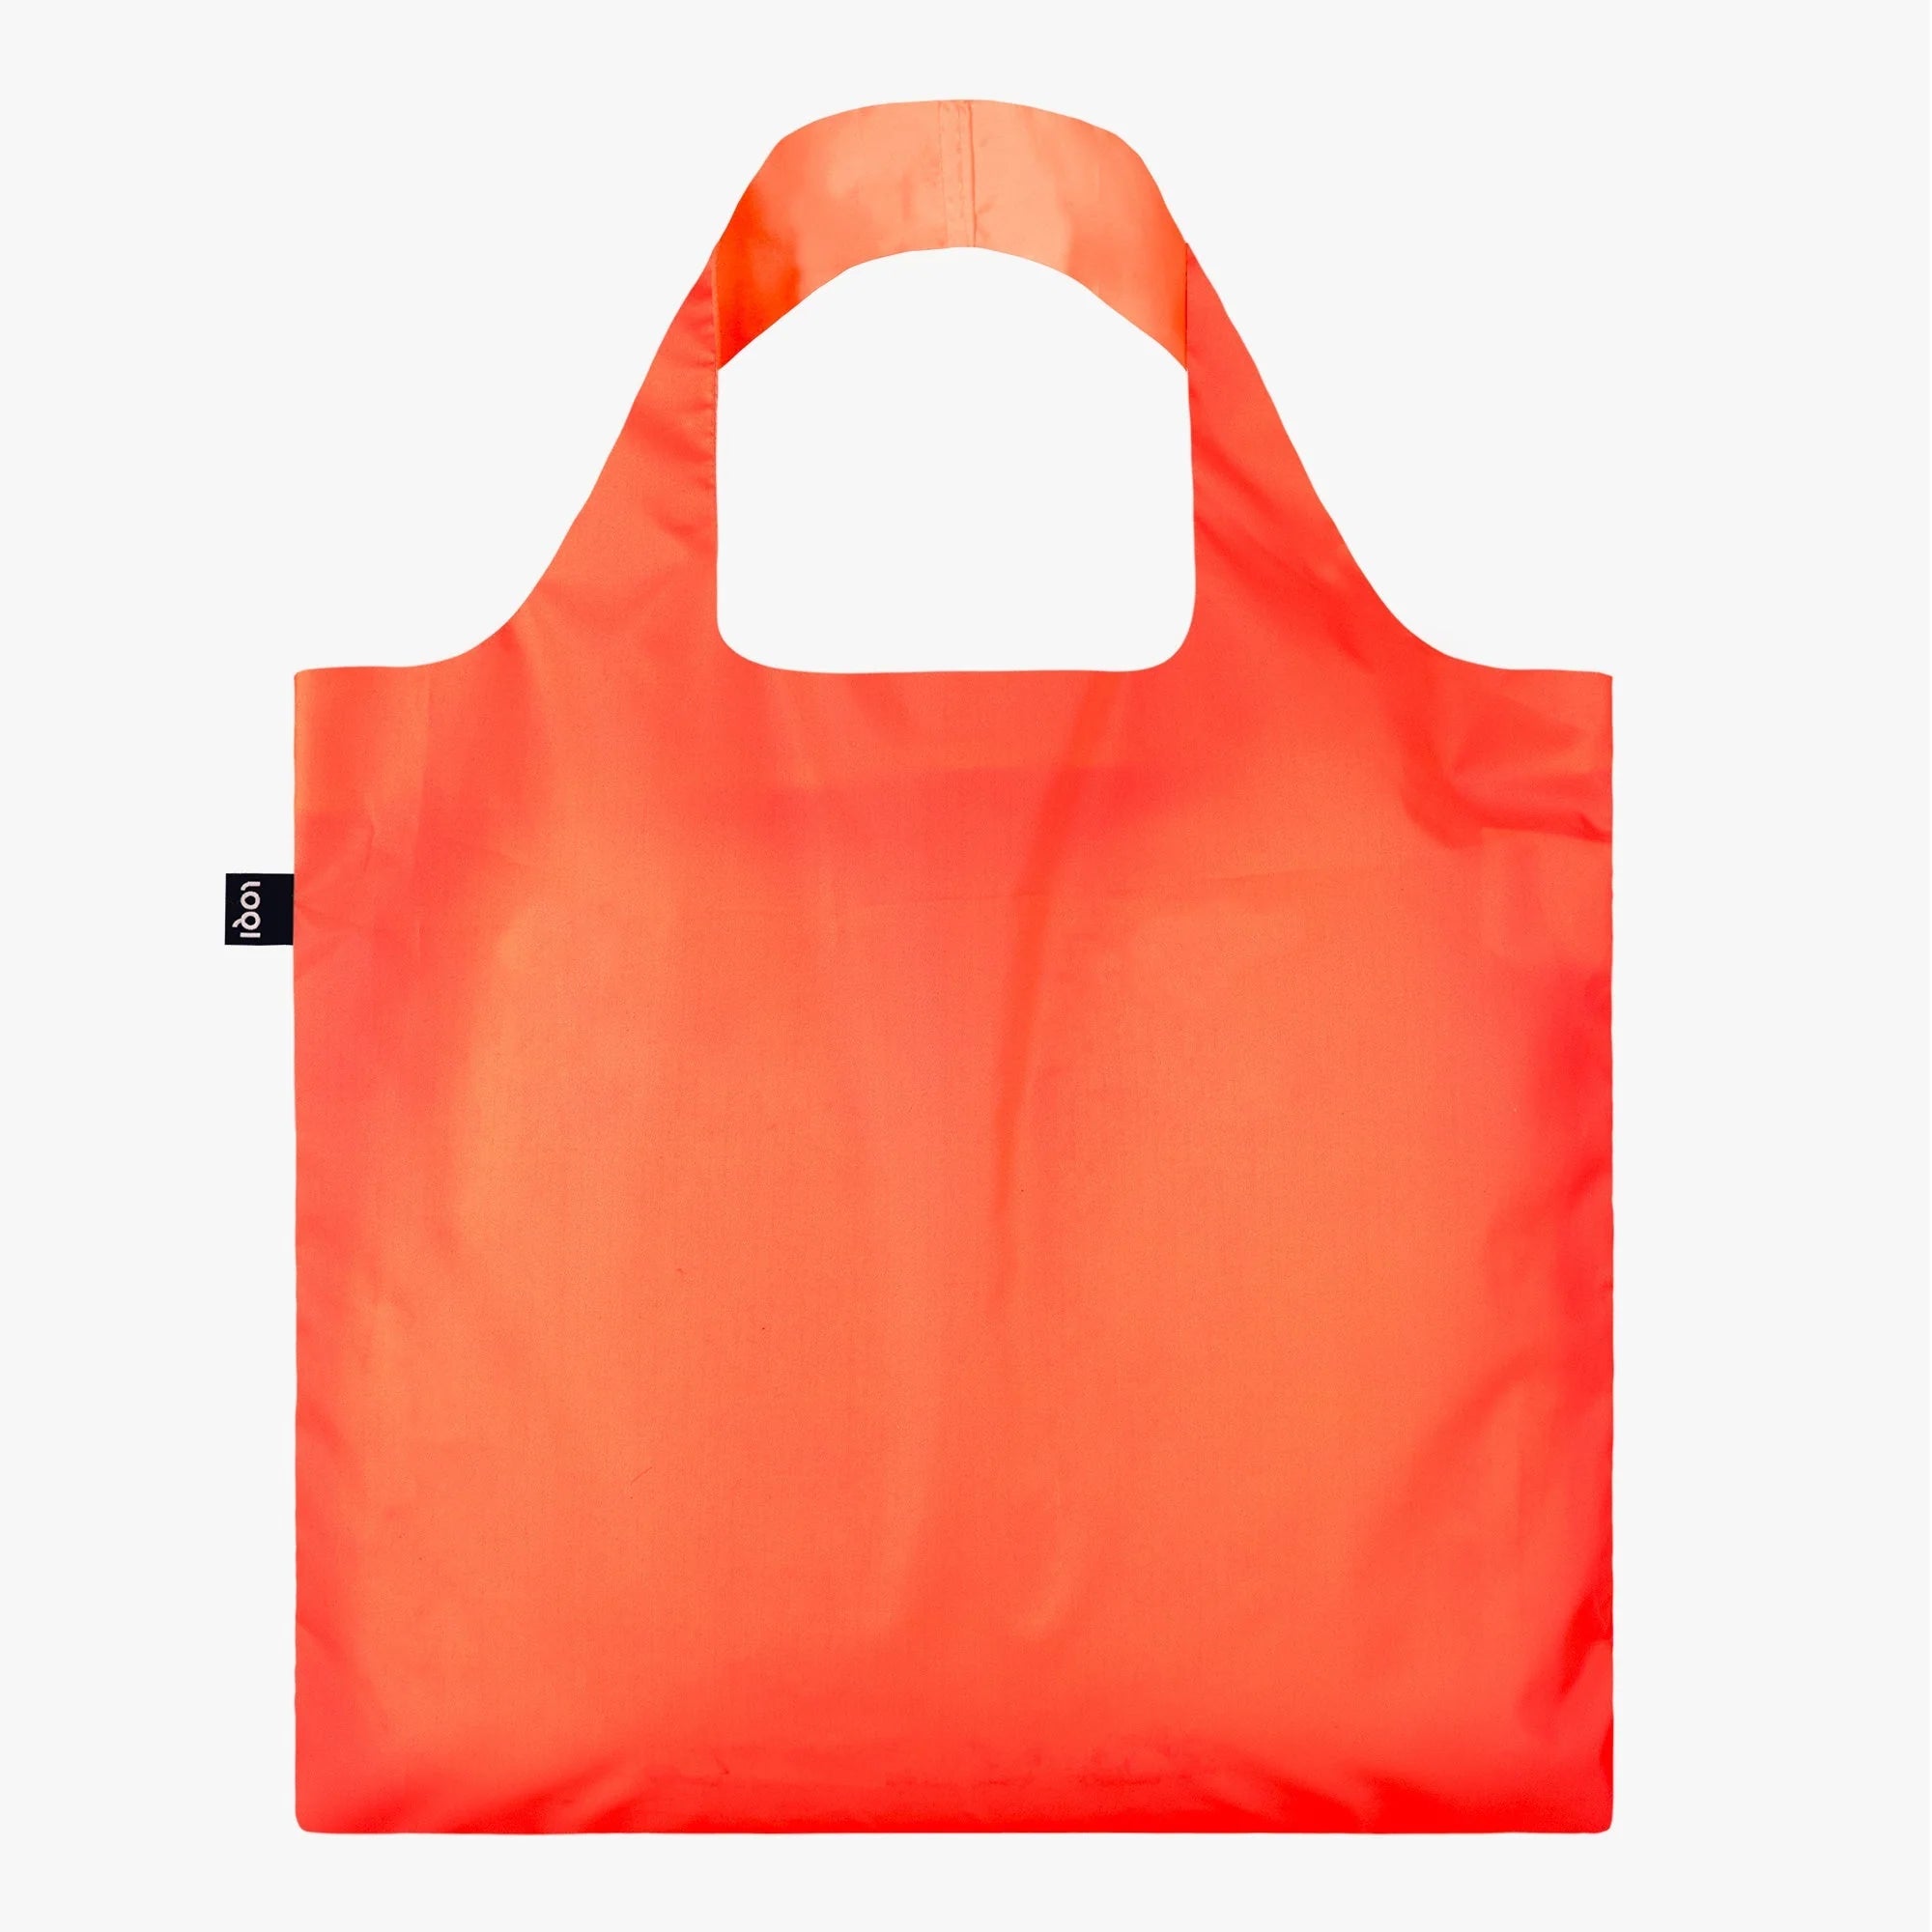 Sustainable Living Loqi Neon Dark Orange Recycled Bag by Weirs of Baggot Street